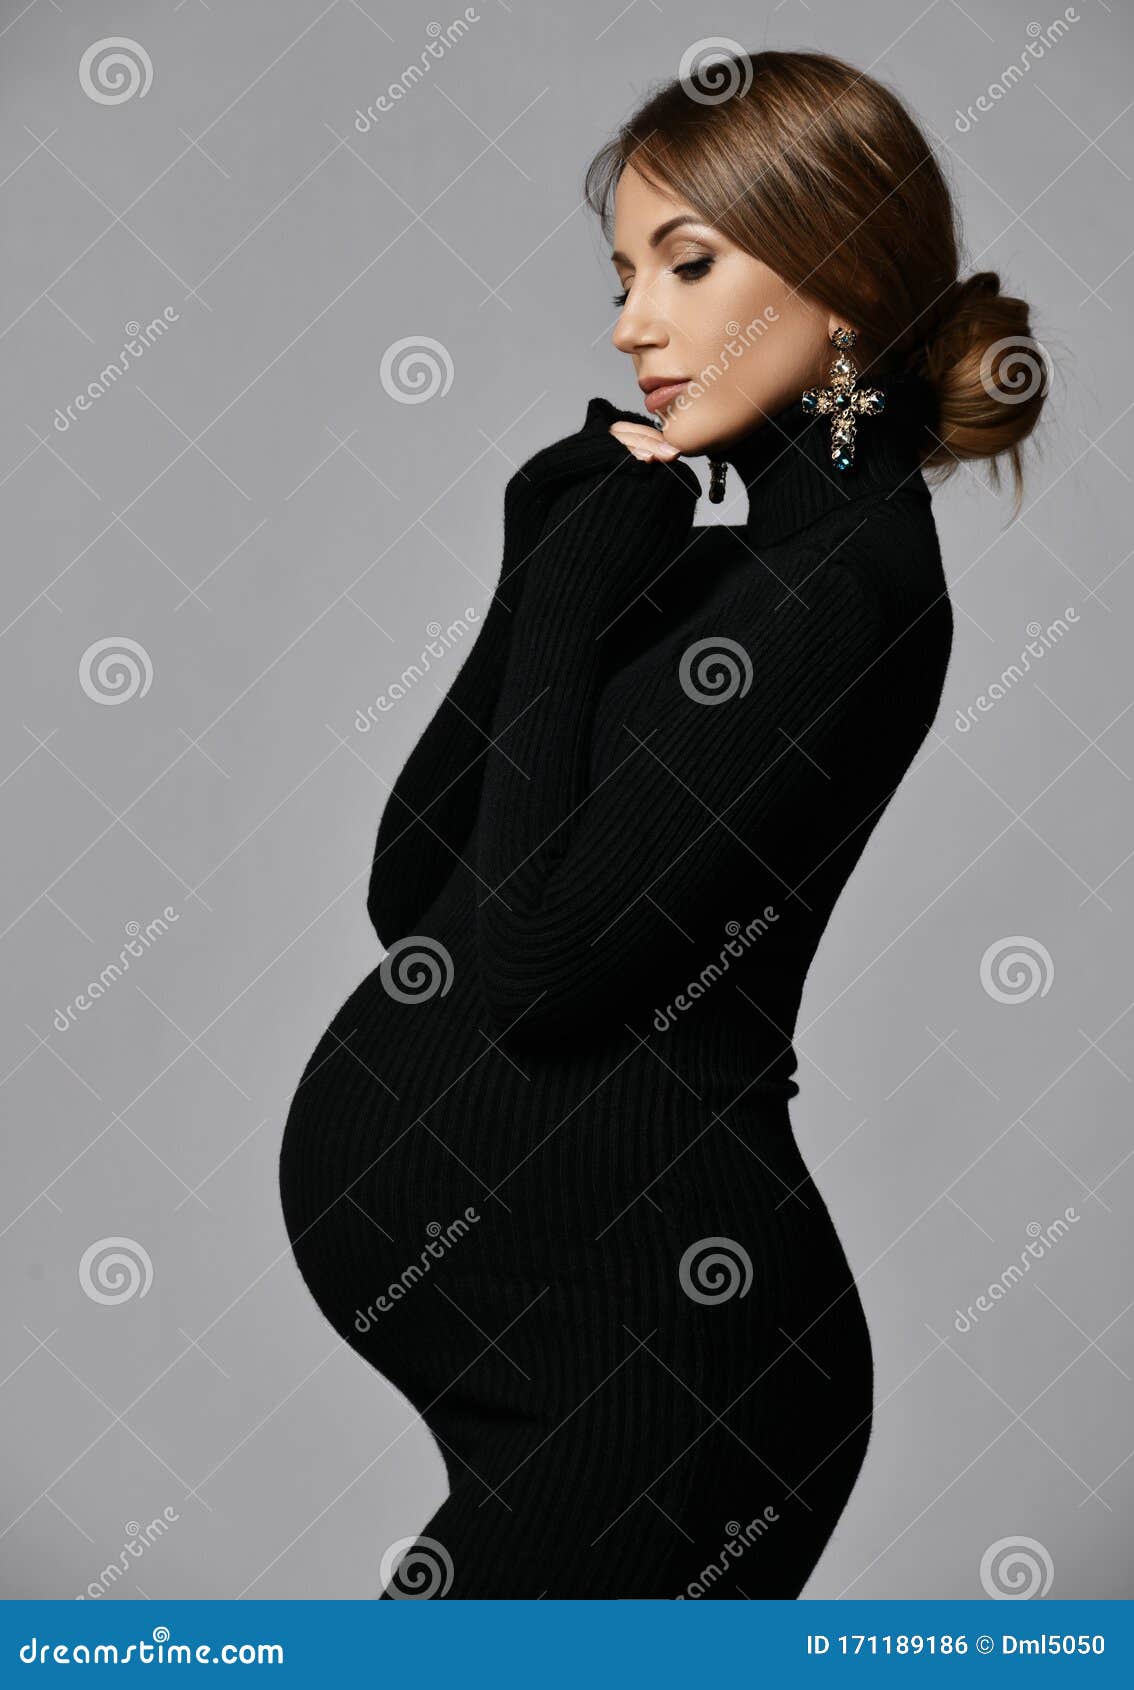 Young Beautiful Slim Pregnant Woman with Long Hair in Black Body and ...